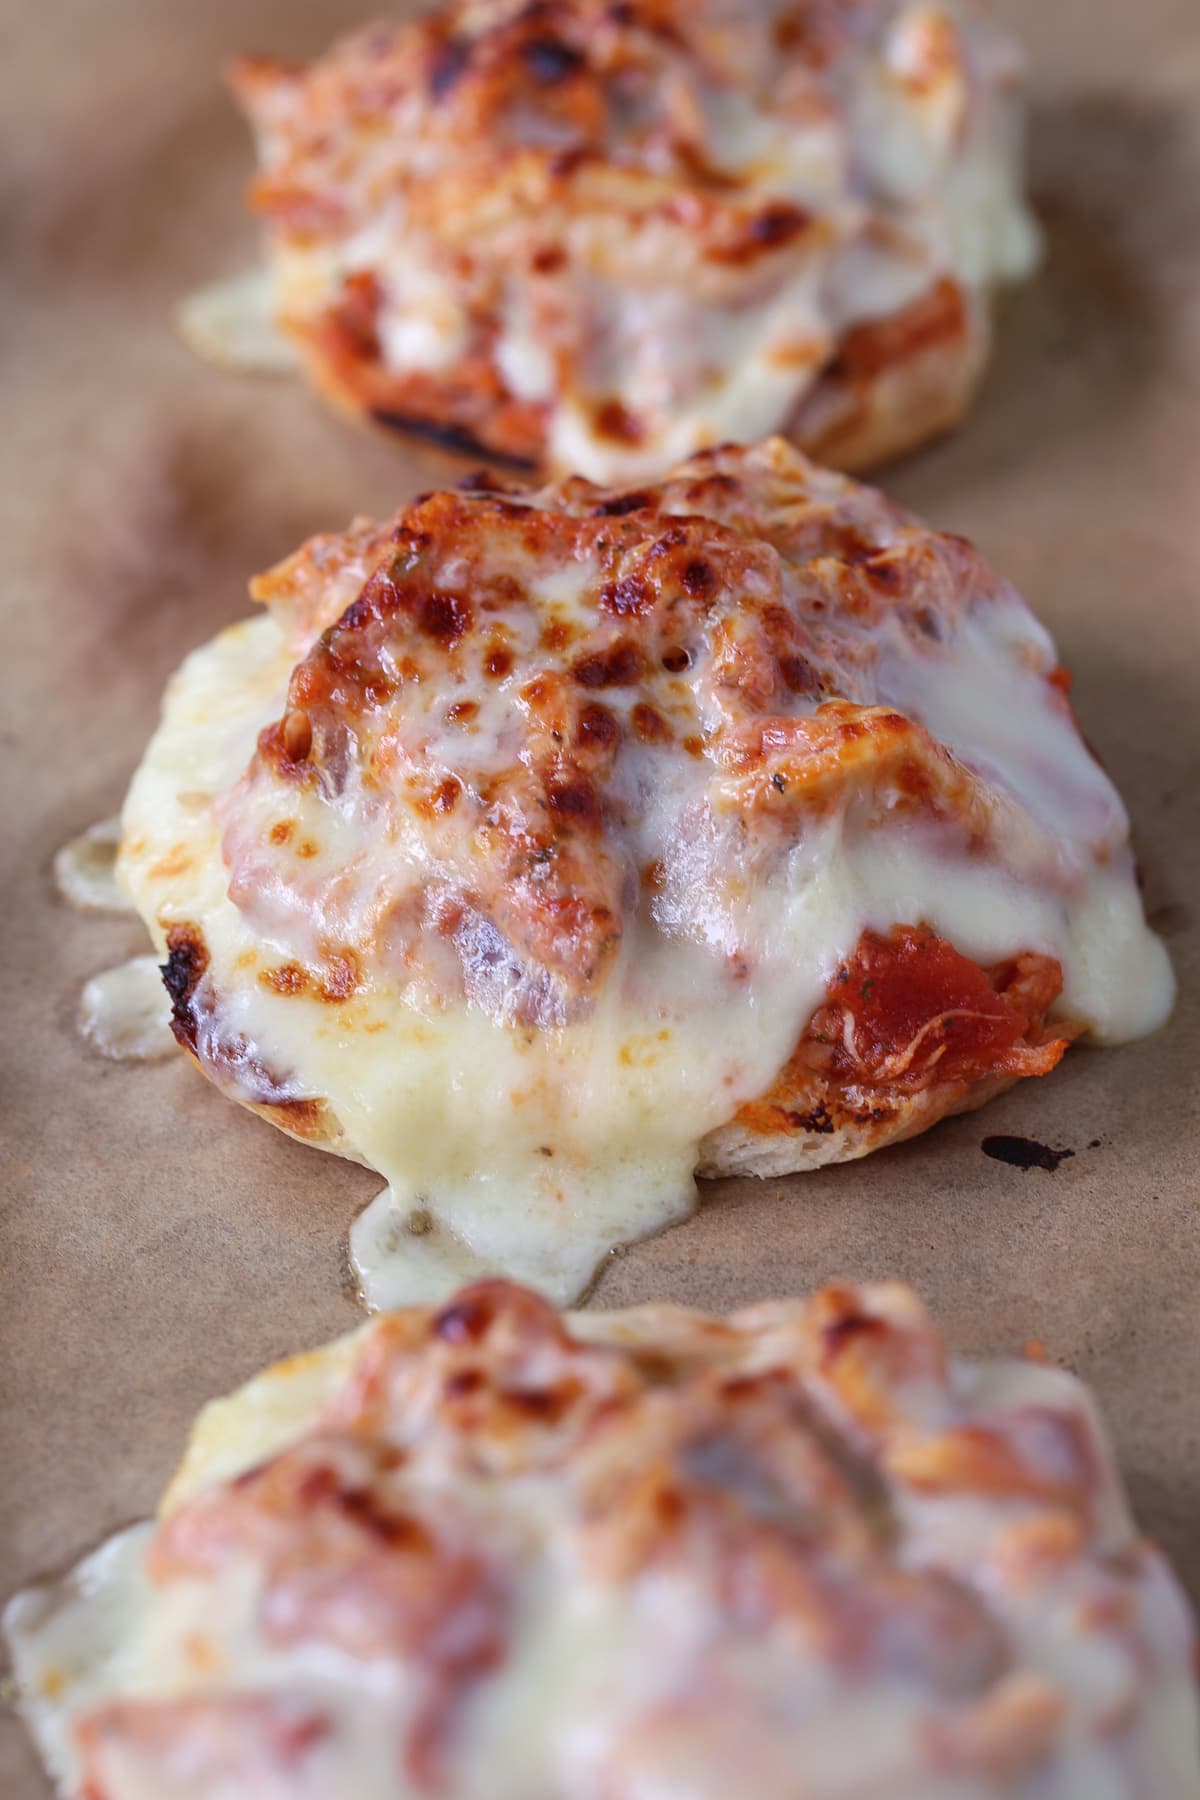 shredded chicken sandwiches with melted mozzarella cheese